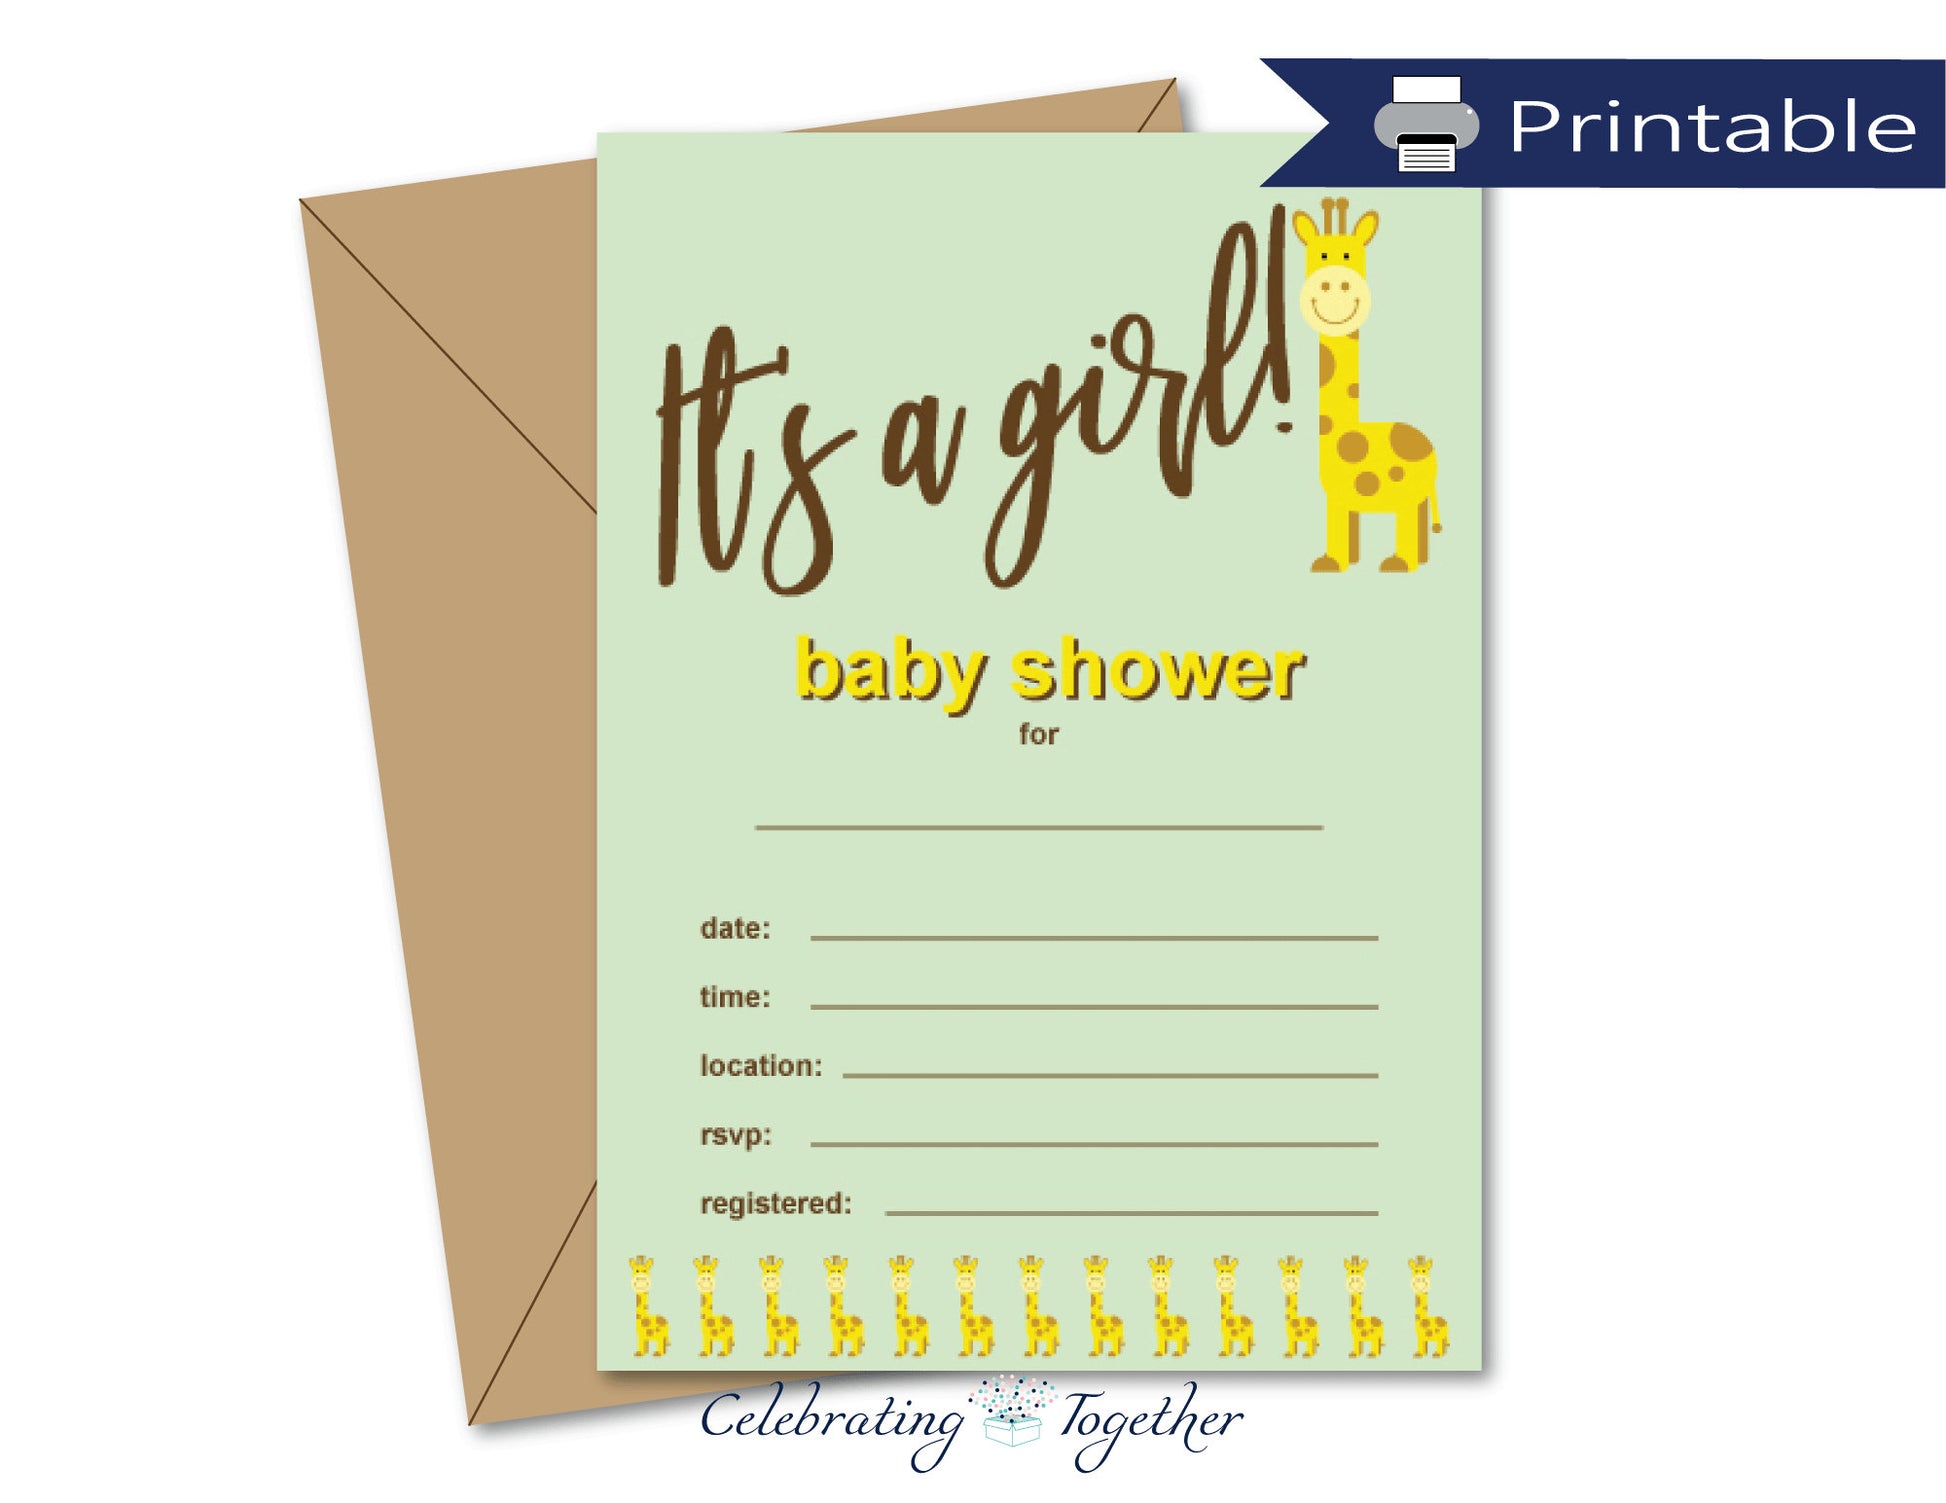 printable it's a girl baby shower invitations - Celebrating Together